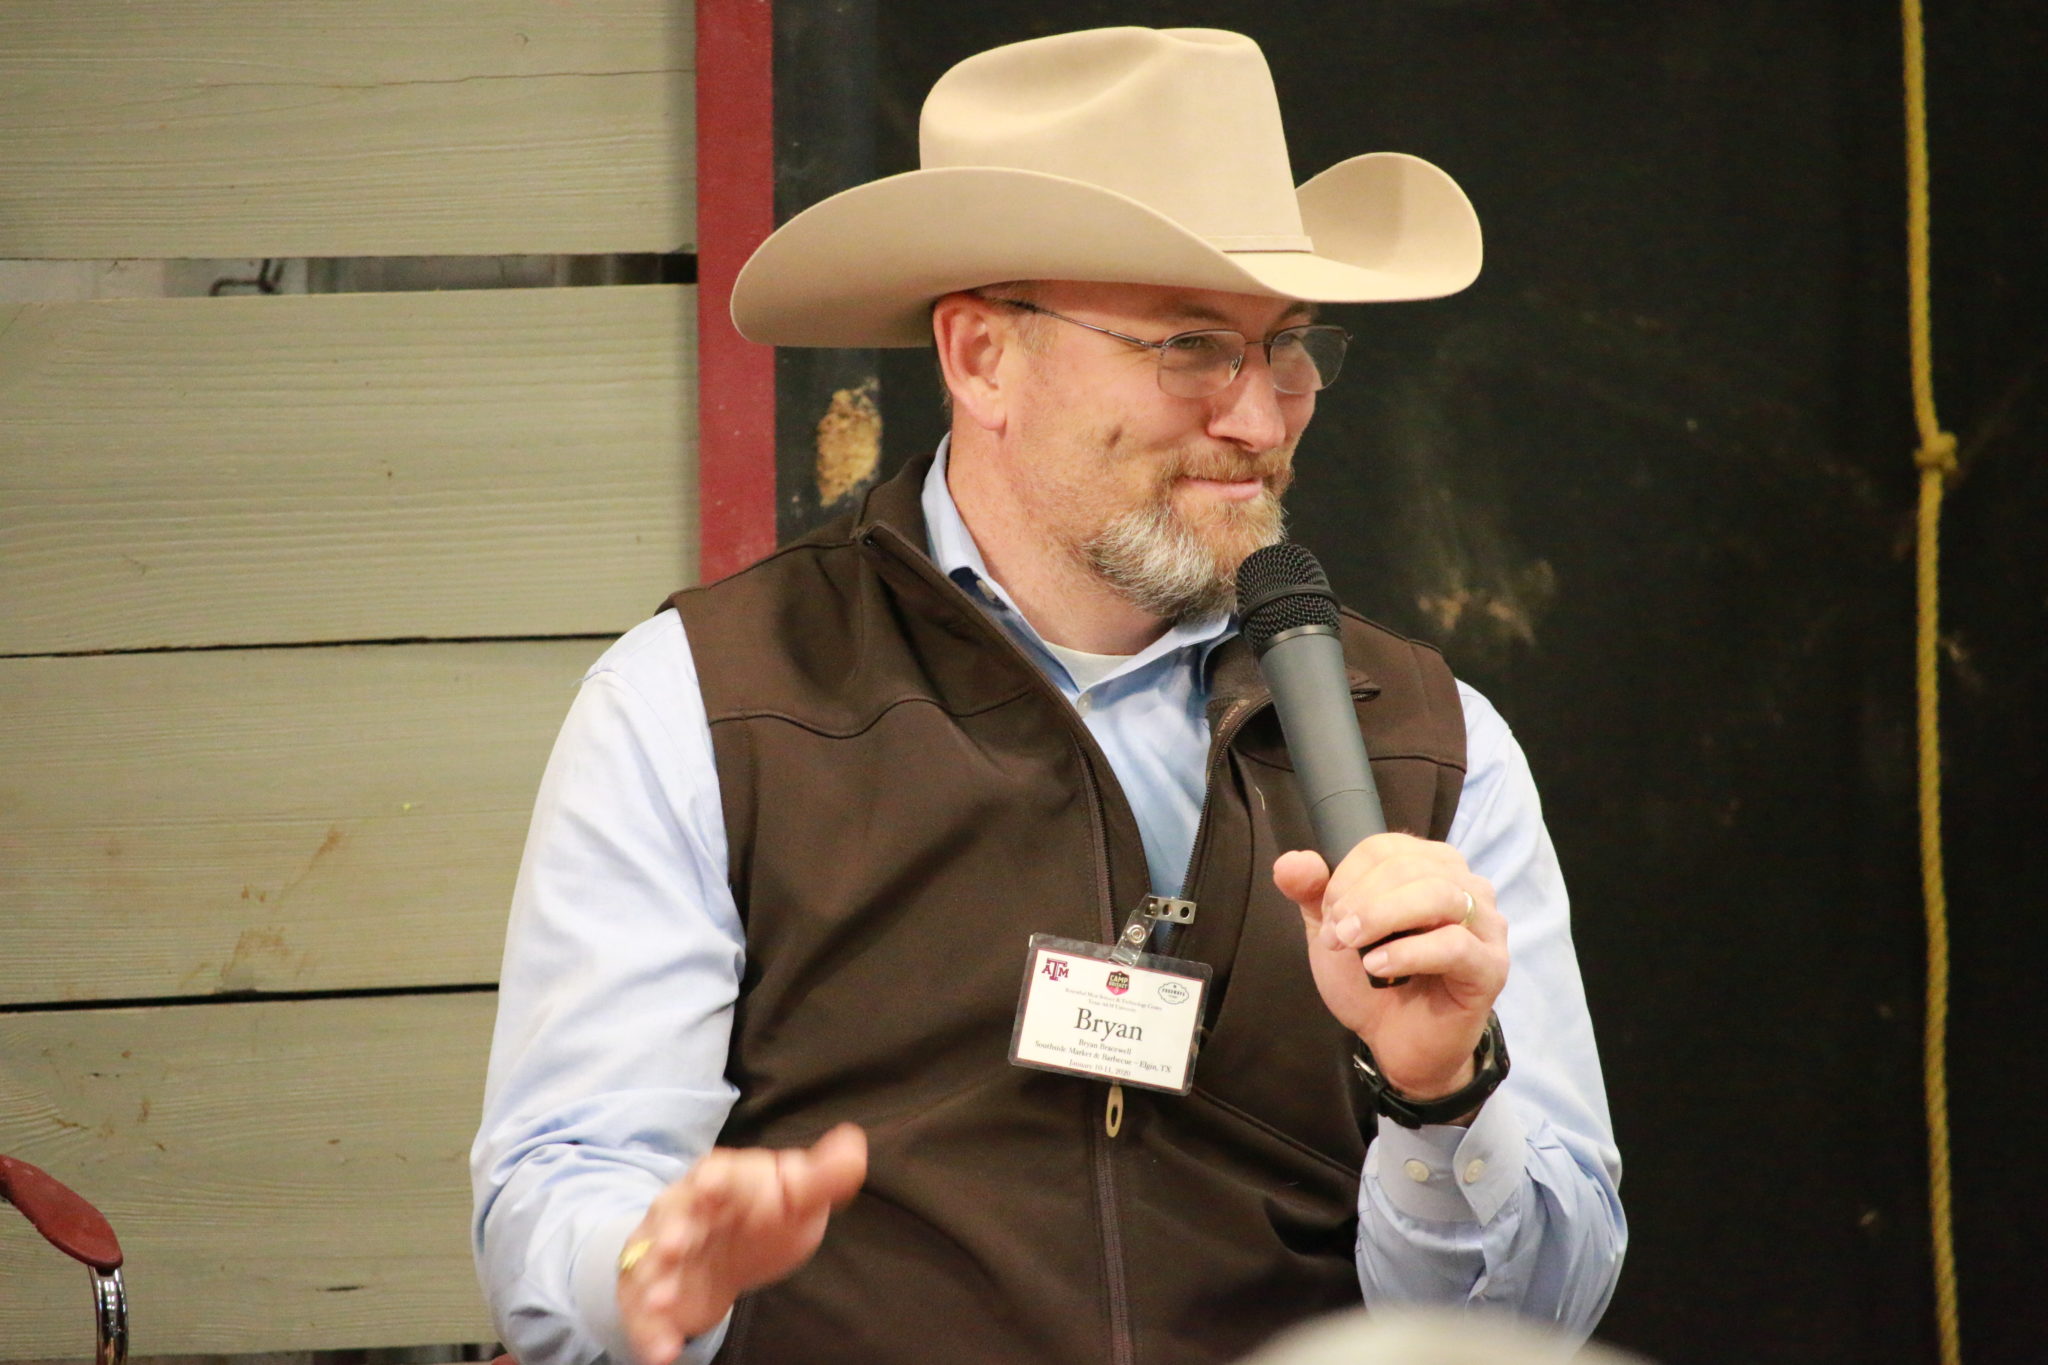 Bryan Bracewell, Southside Market and Barbeque, speaking on the Pit Design and Maintenance Panel at Camp Brisket